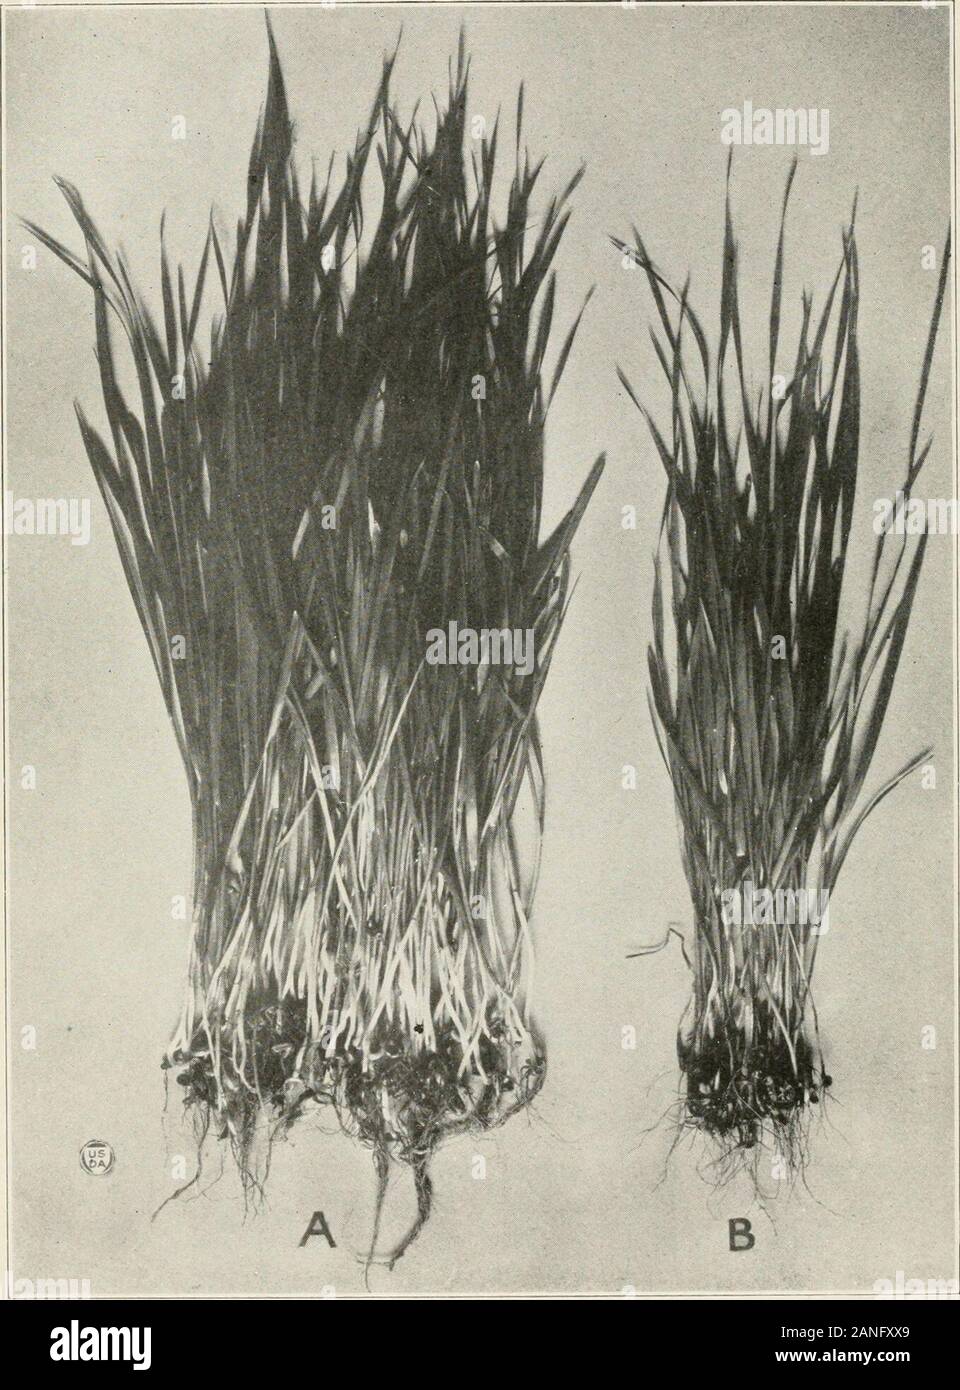 Journal of Agricultural Research . Plate lournal of Agricultural Research Washington, DC- v8 v Helminthosporium Disease of Wheat Plate 2. Journal of Agricultural Research Washington, D. C. •v^ 9°- PLATE a Marquis wheat seedlings, healthy and artificially infected with Helminthosporiumsativum. A.—Healthy plants from 115 disinfected kernels sown in steam-sterilized, imin-oculated soil. B.—Infected plants, same age as A, from 115 disinfected kernels sown in part ofthe same lot of soil inoculated at sowing time with a water suspension of conidia ofH. sativum growTi in pure culture (culture 51a) is Stock Photo